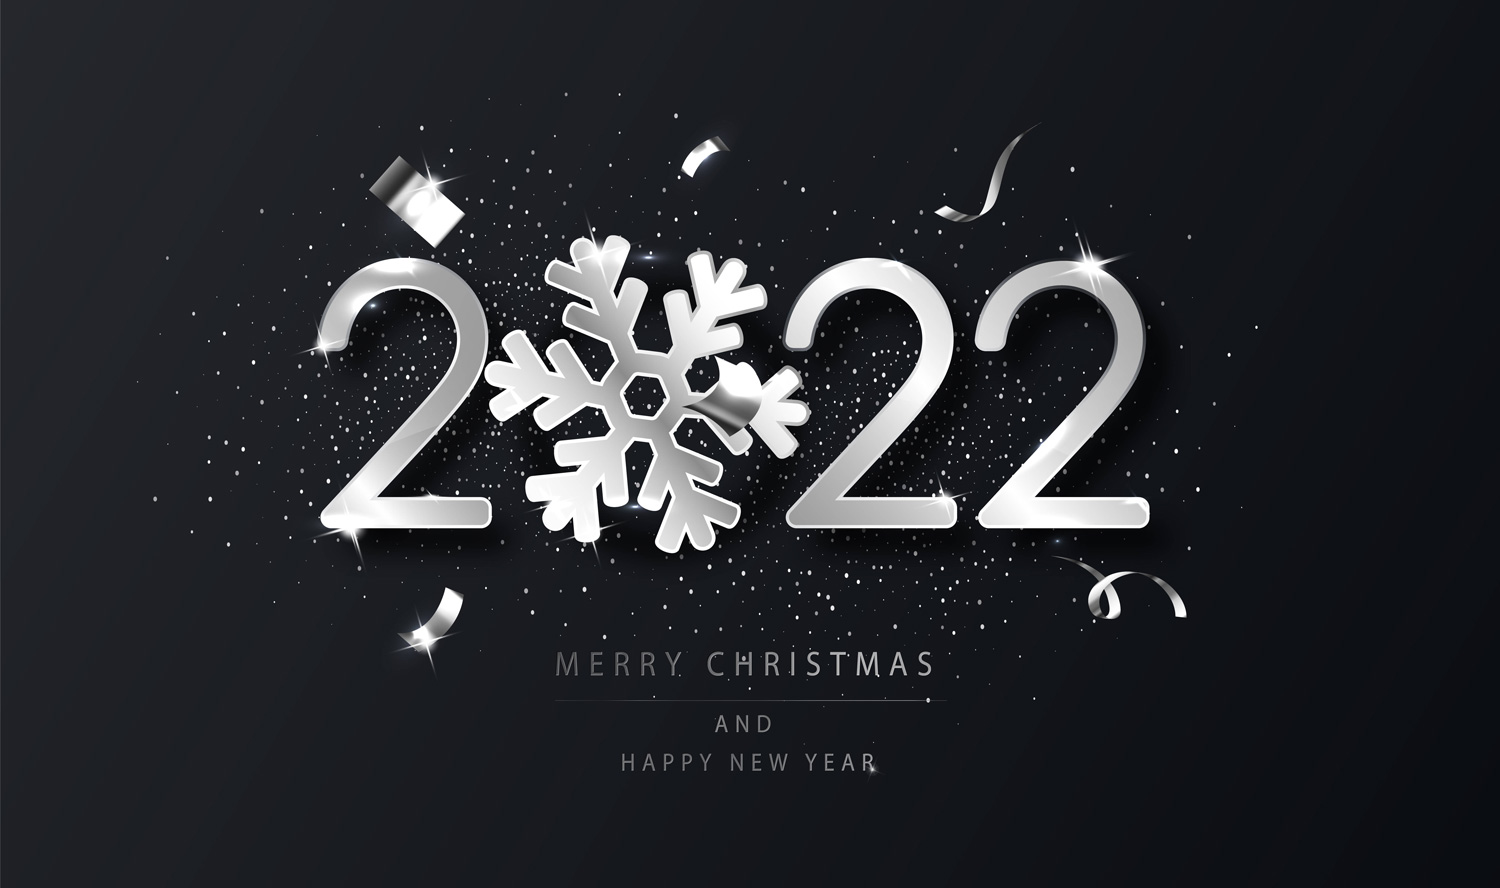 Merry Christmas 2021 Happy New Year 2022 Images and Wallpaper 1500x888